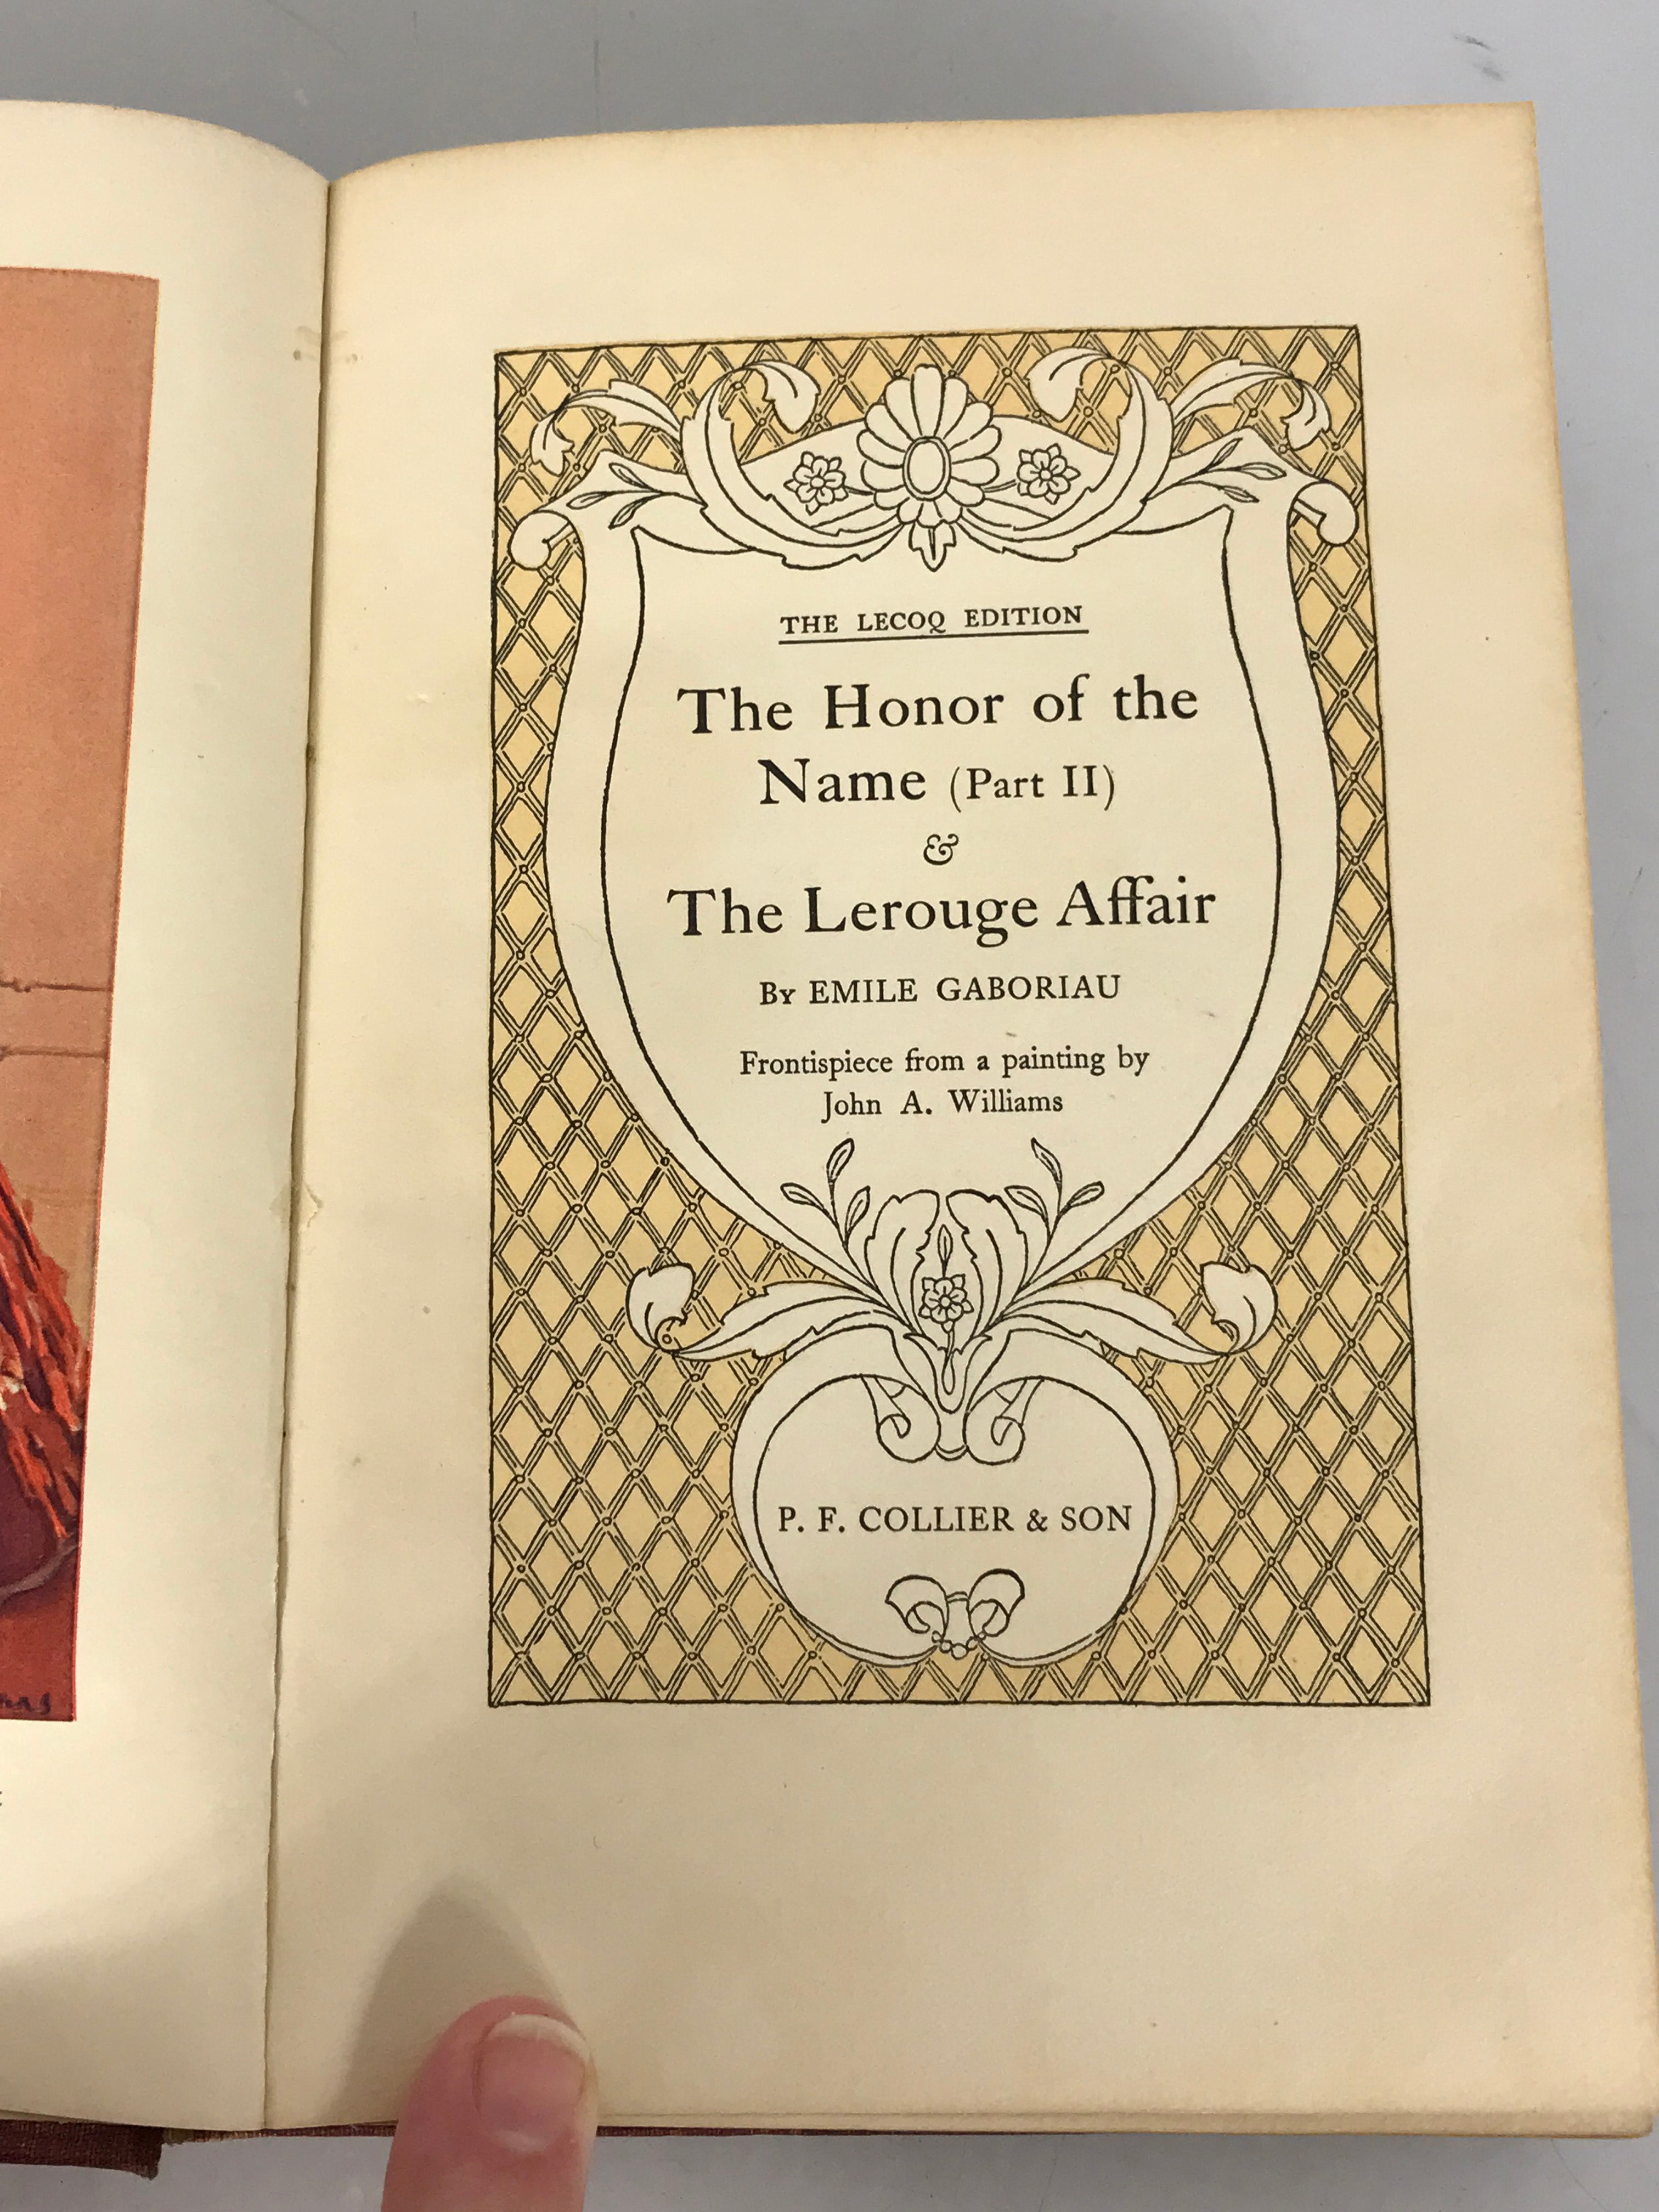 The Honor of the Name (Part II) and The Lerouge Affair by Emile Gaboriau Antique Lecoq Edition 1908 HC